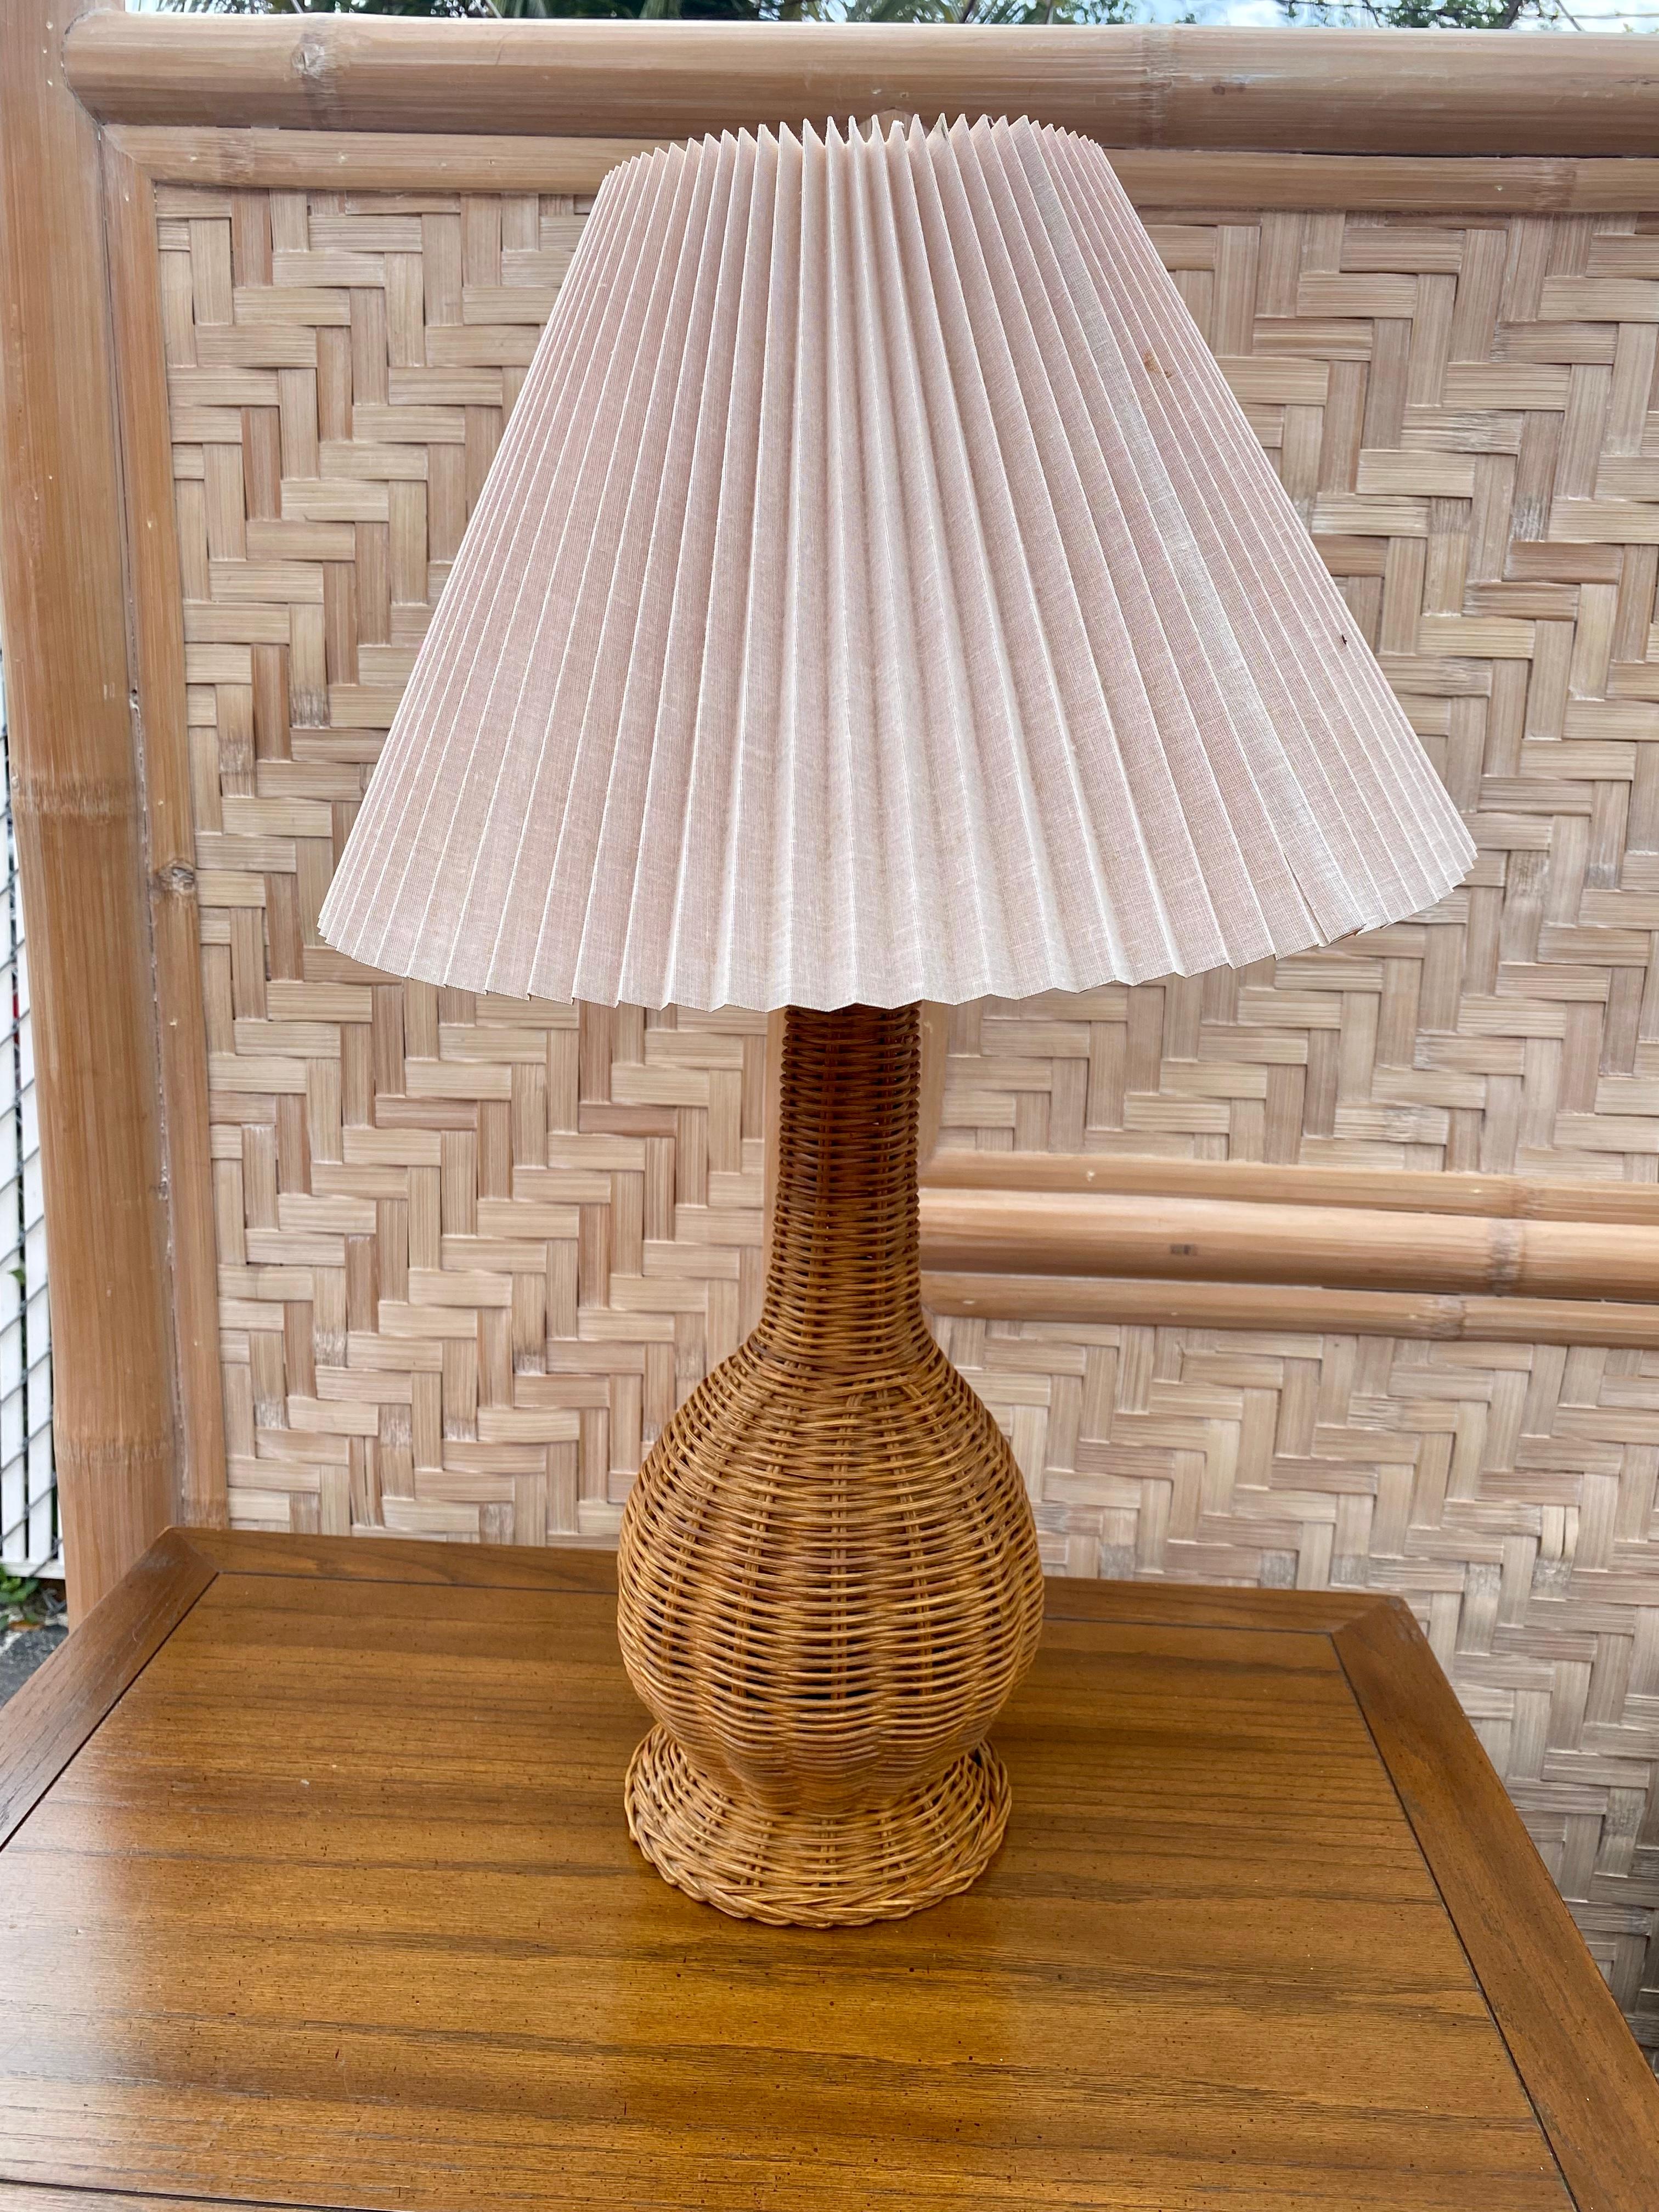 1970s Rattan Jar Wicker Table Lamps, Set of 2 In Good Condition For Sale In Fort Lauderdale, FL